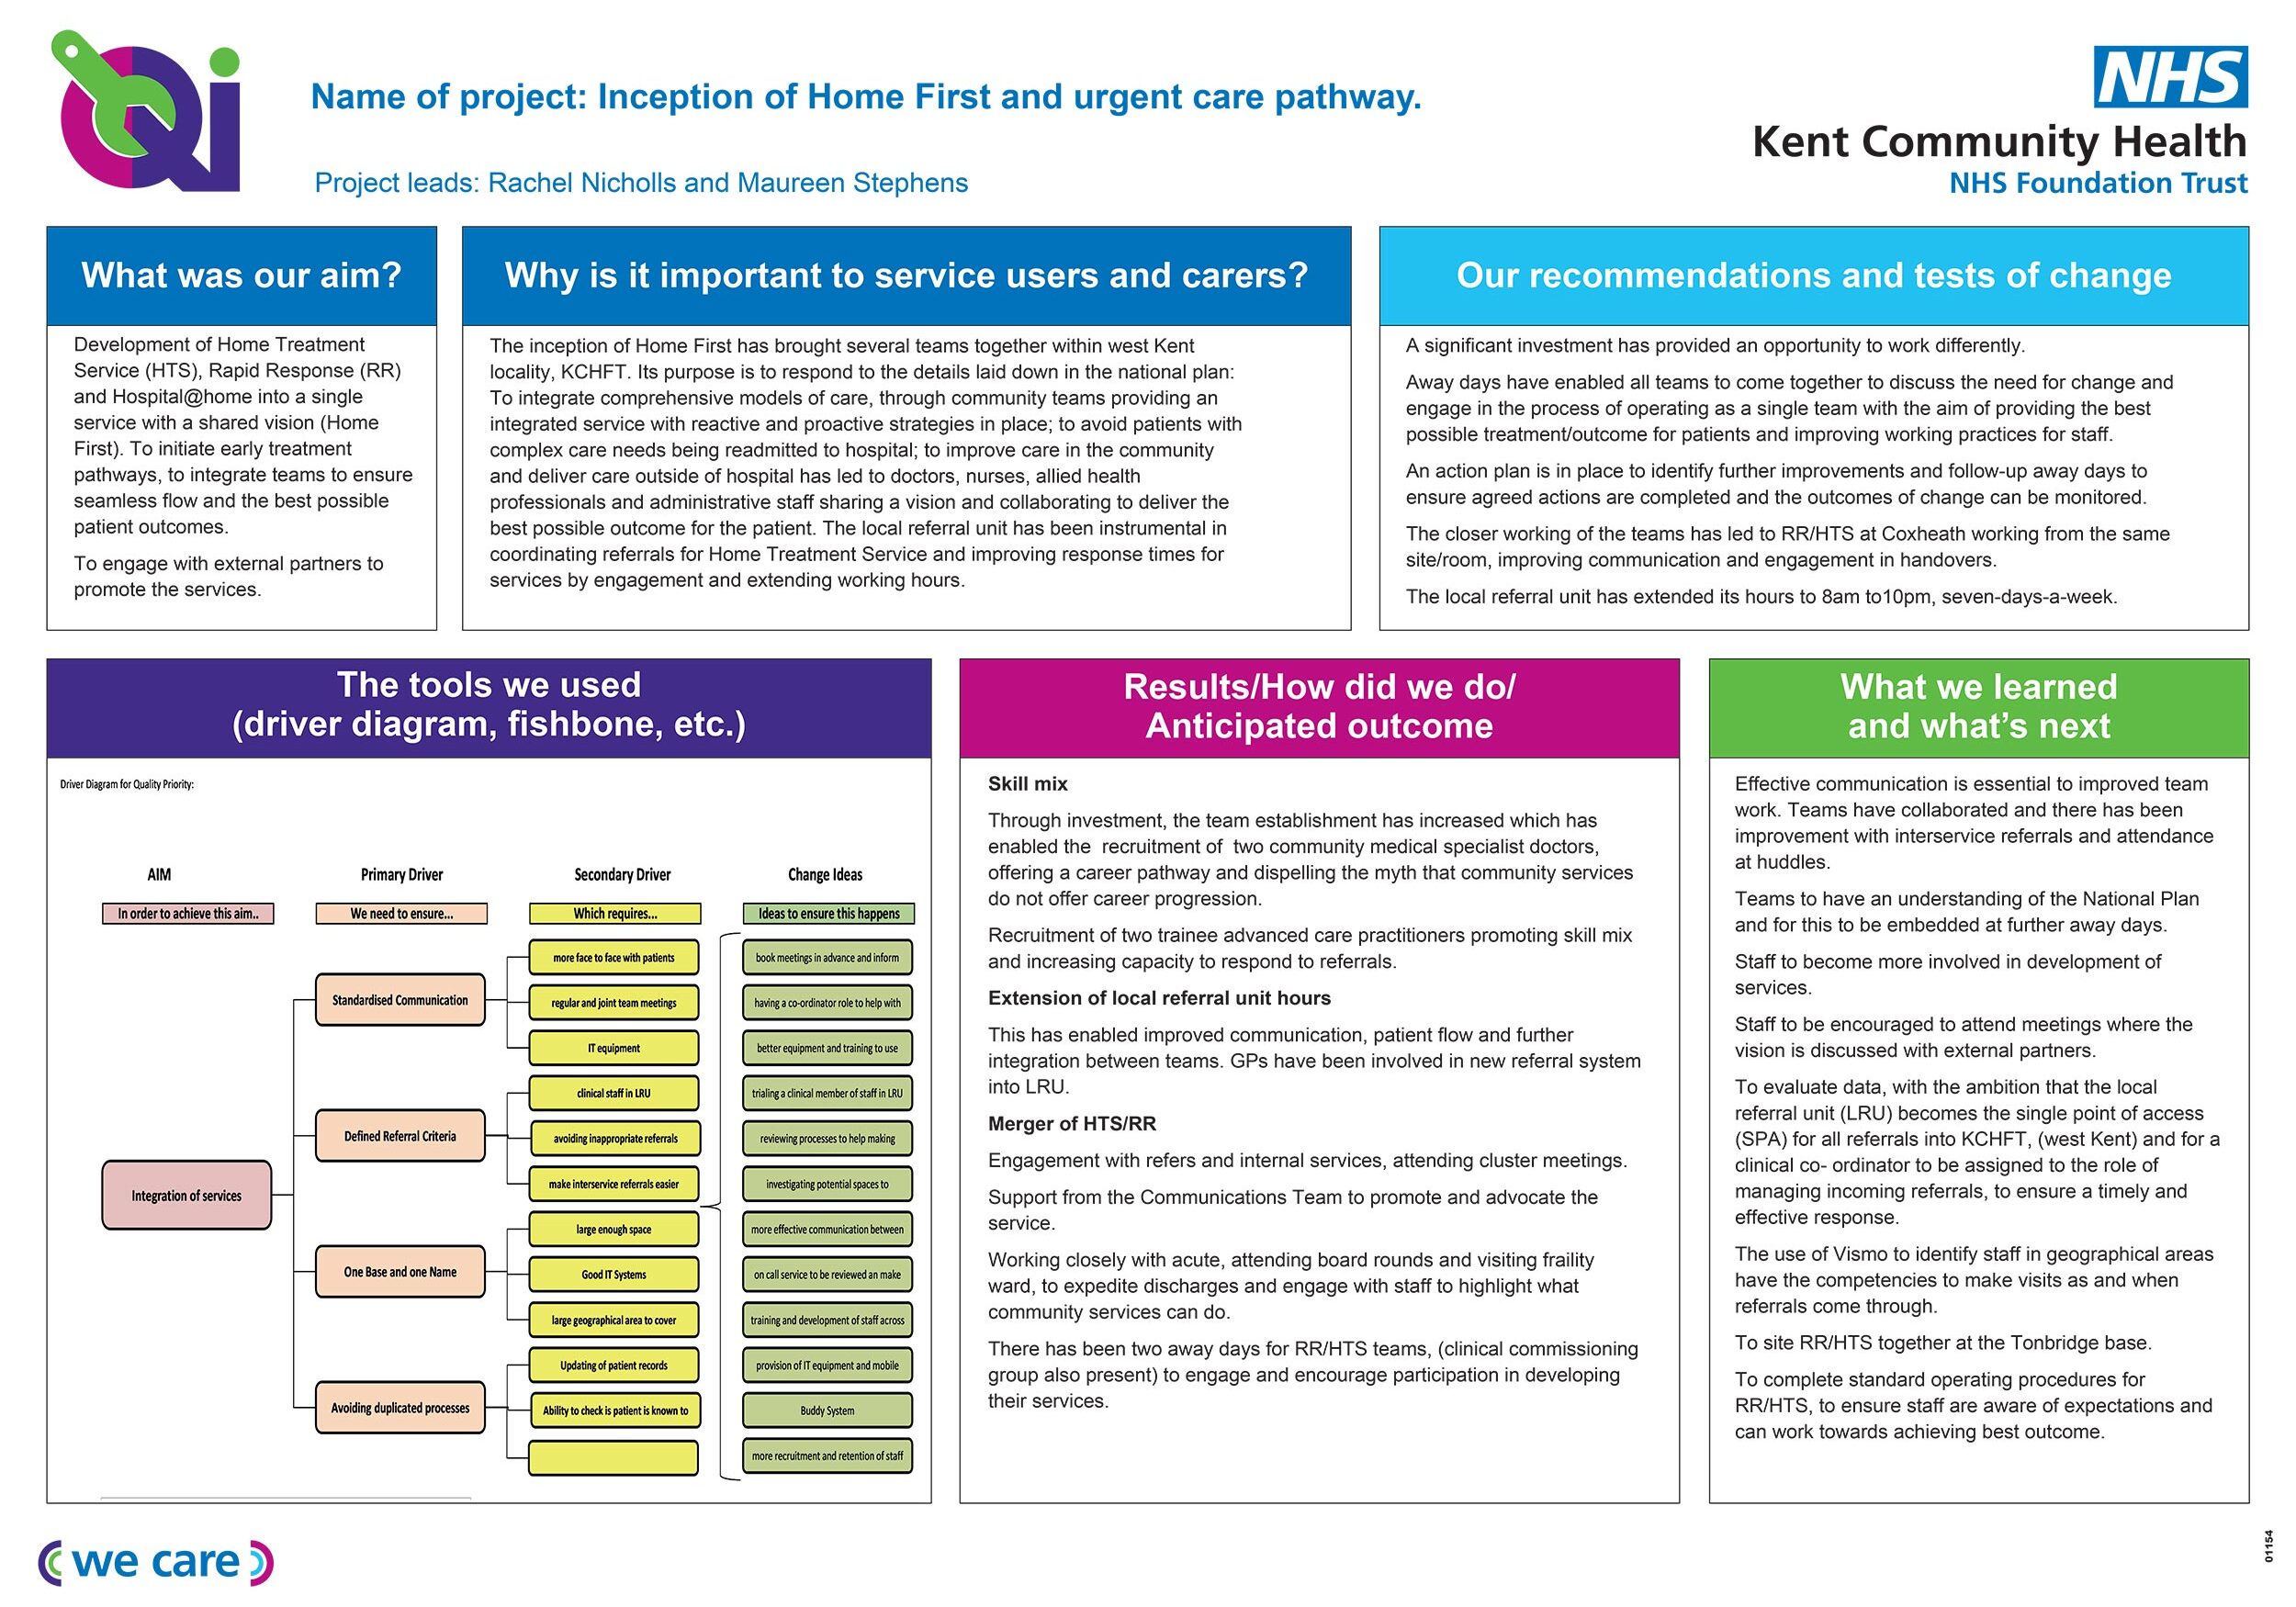 Inception of Home First Care Pathway